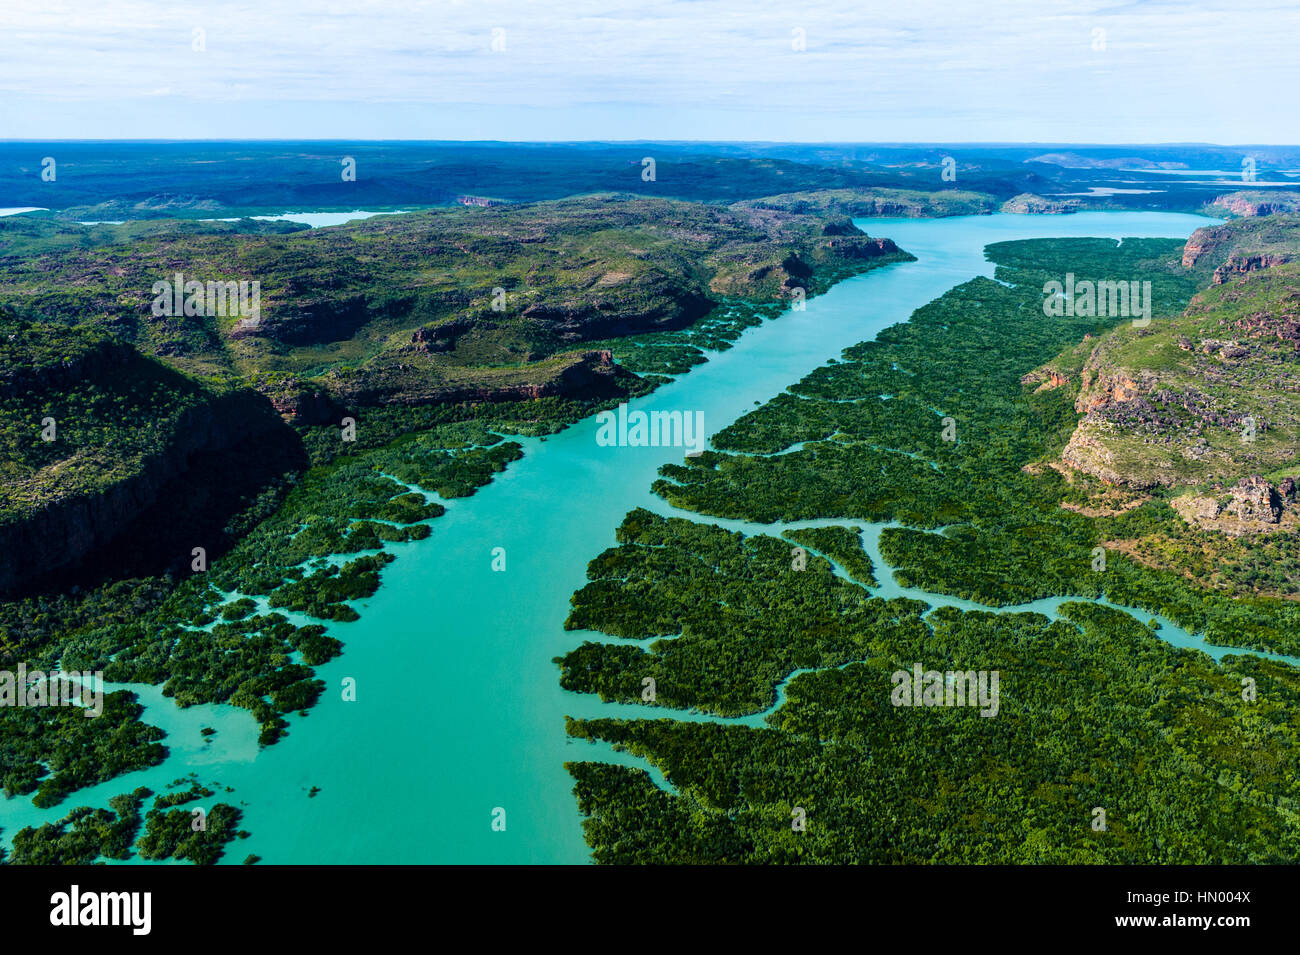 An aerial view of river tidal inlets winding their way through mangrove forests. Stock Photo